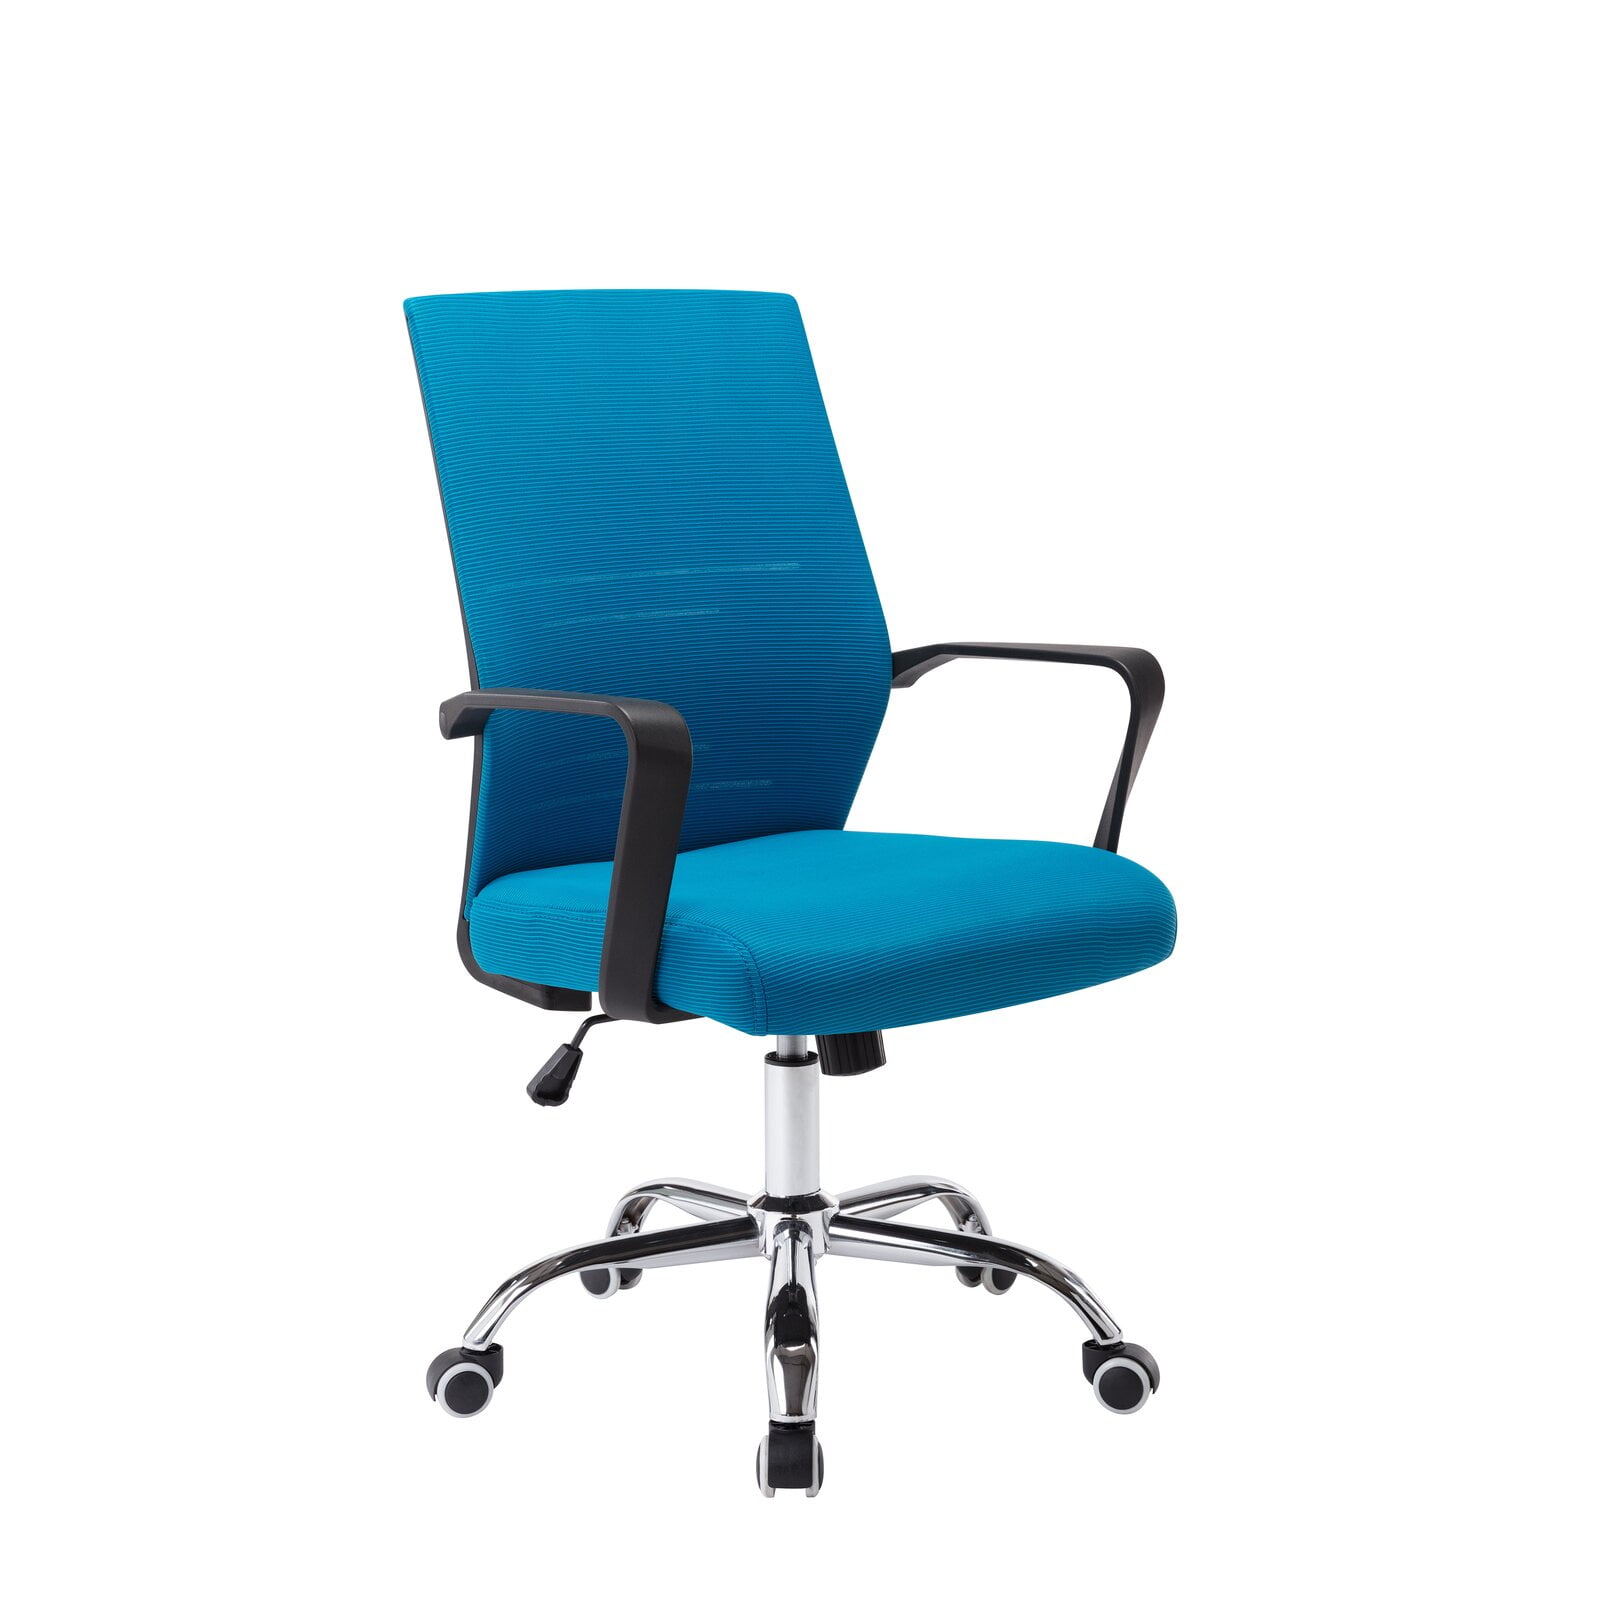 Madteos Mesh Conference Chair, Adjustability: Swivel, These office